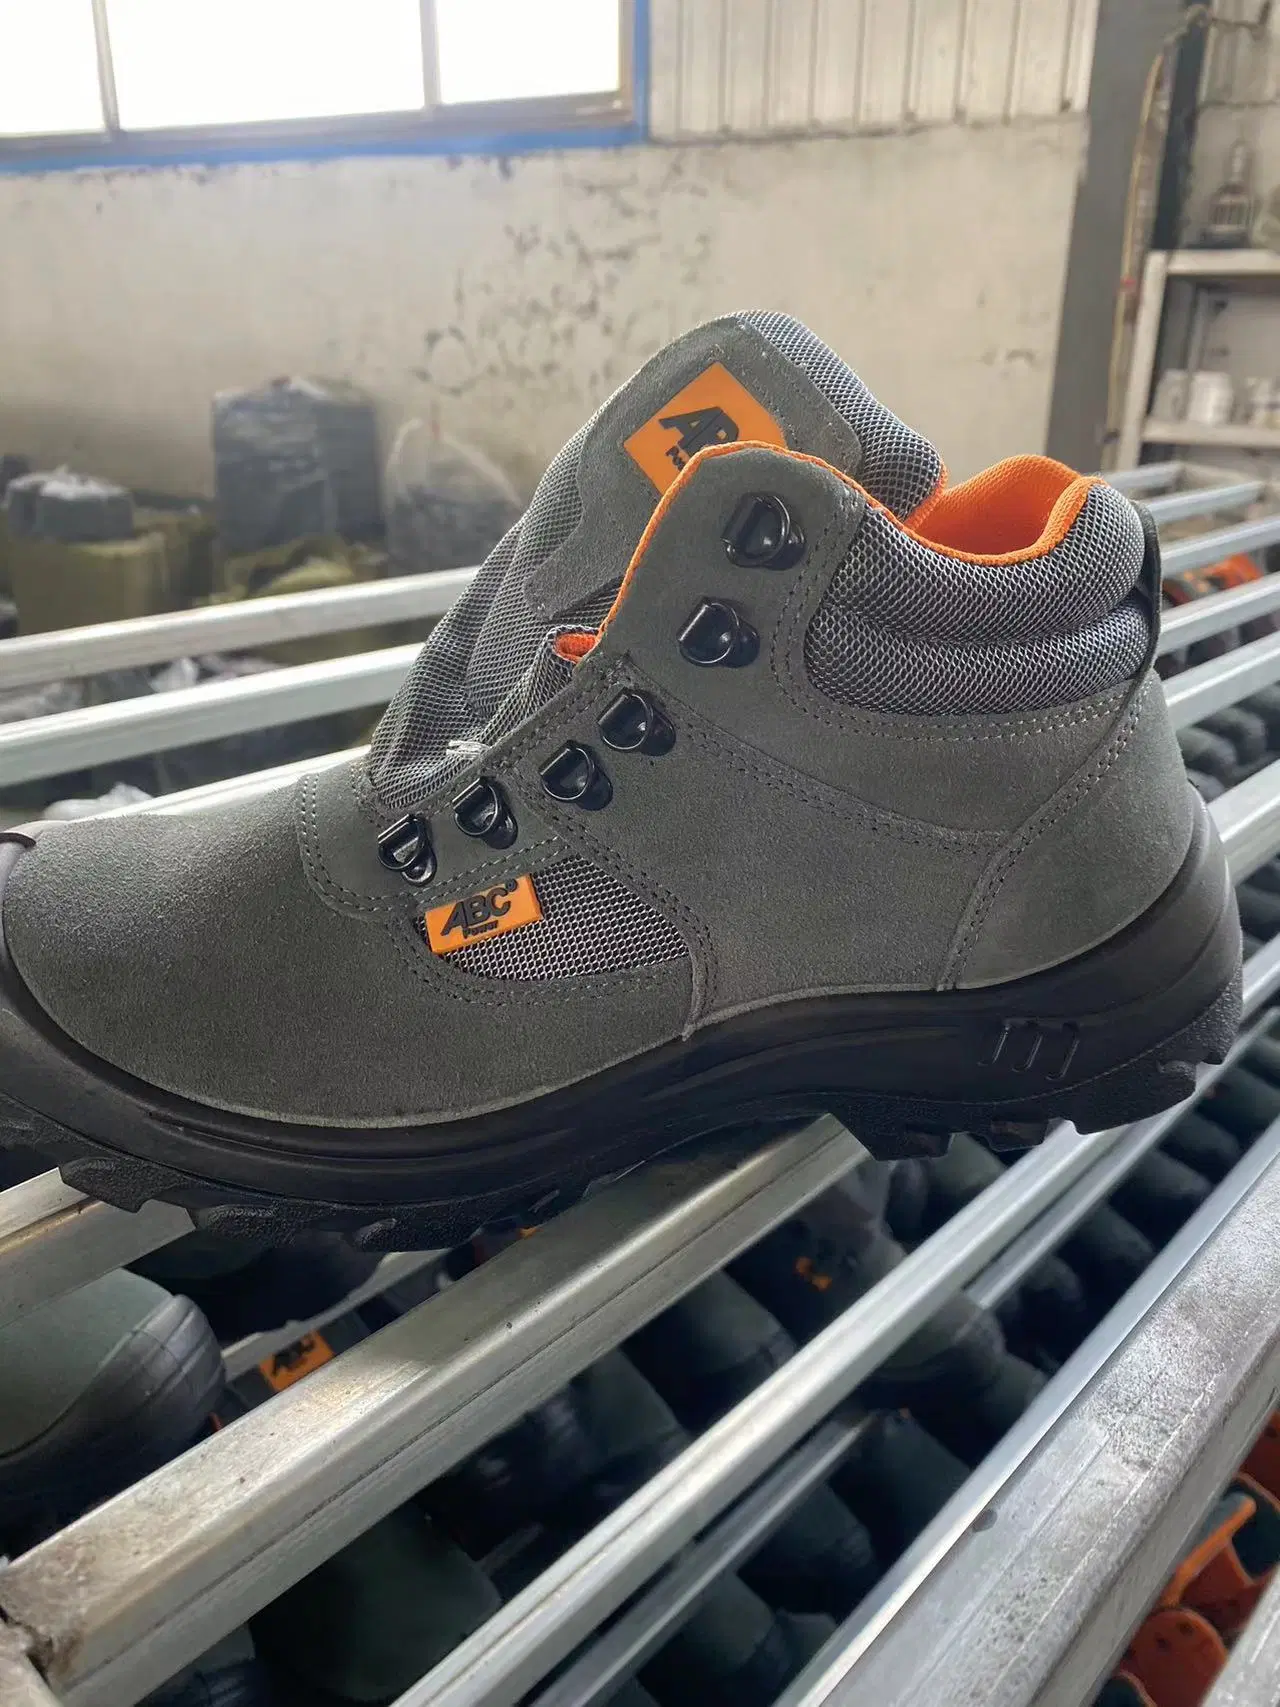 China Products/Suppliers. Steel Toe Genuine Leather Safety Shoes